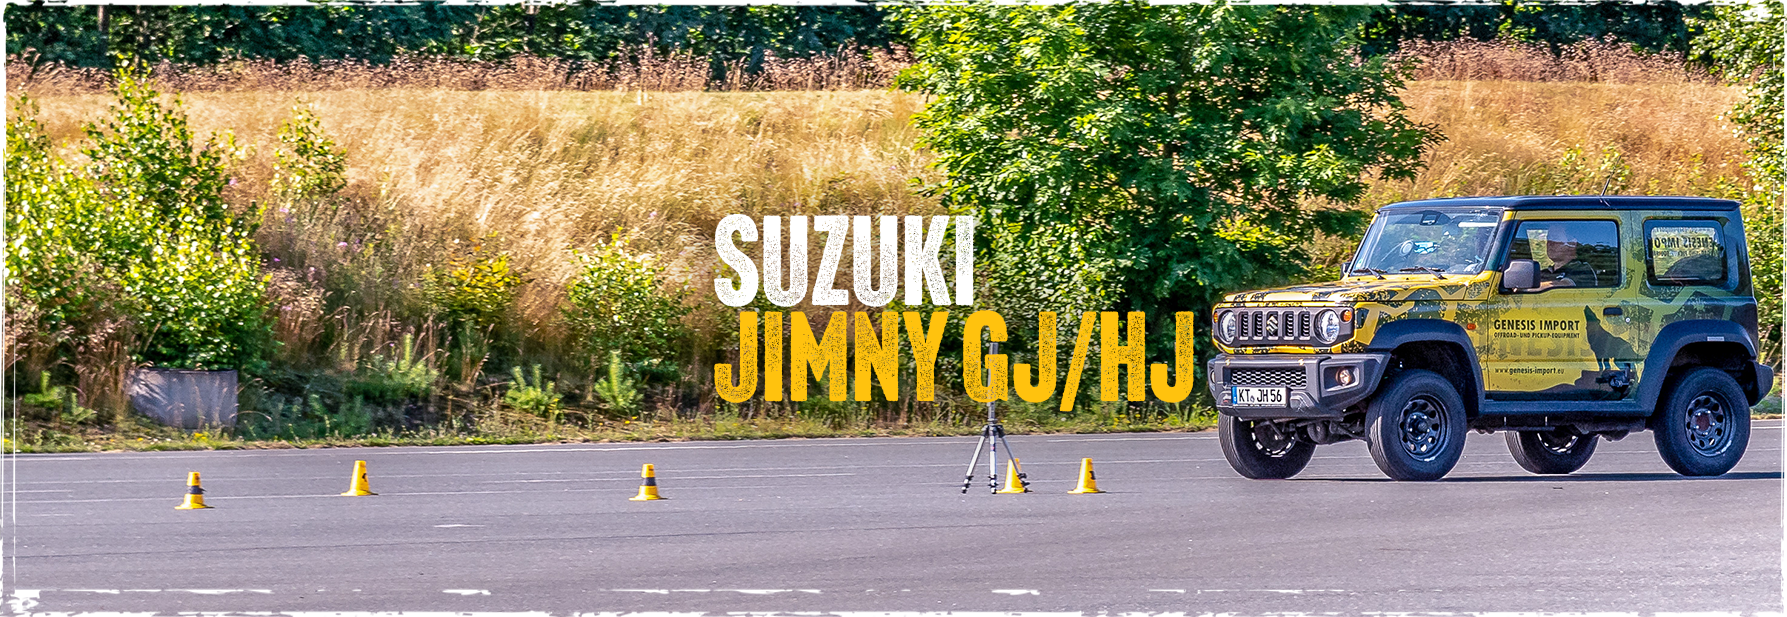 Suspension for Suzuki Jimny GJ/HJ with ABE and Bodylift - Genesis Import